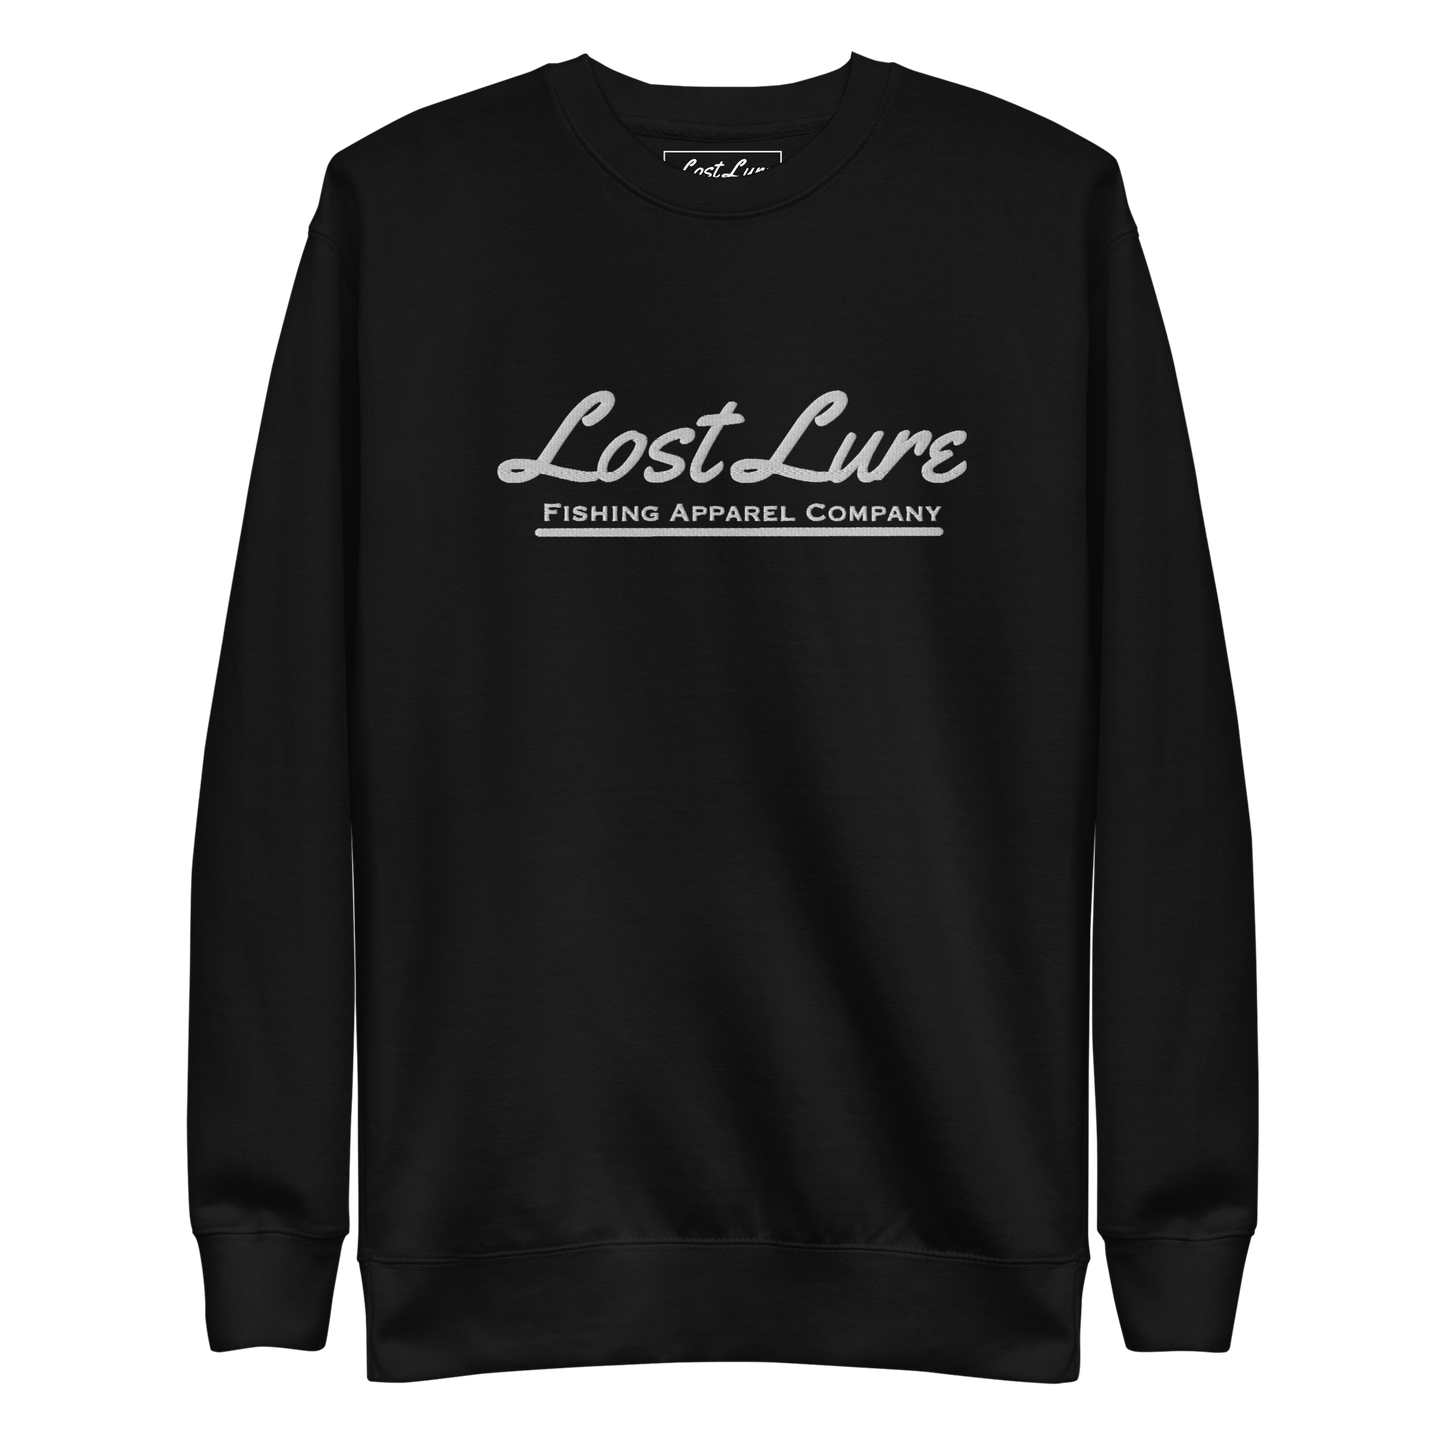 Black and lost lure embroidered fishing pullover / sweatshirt.